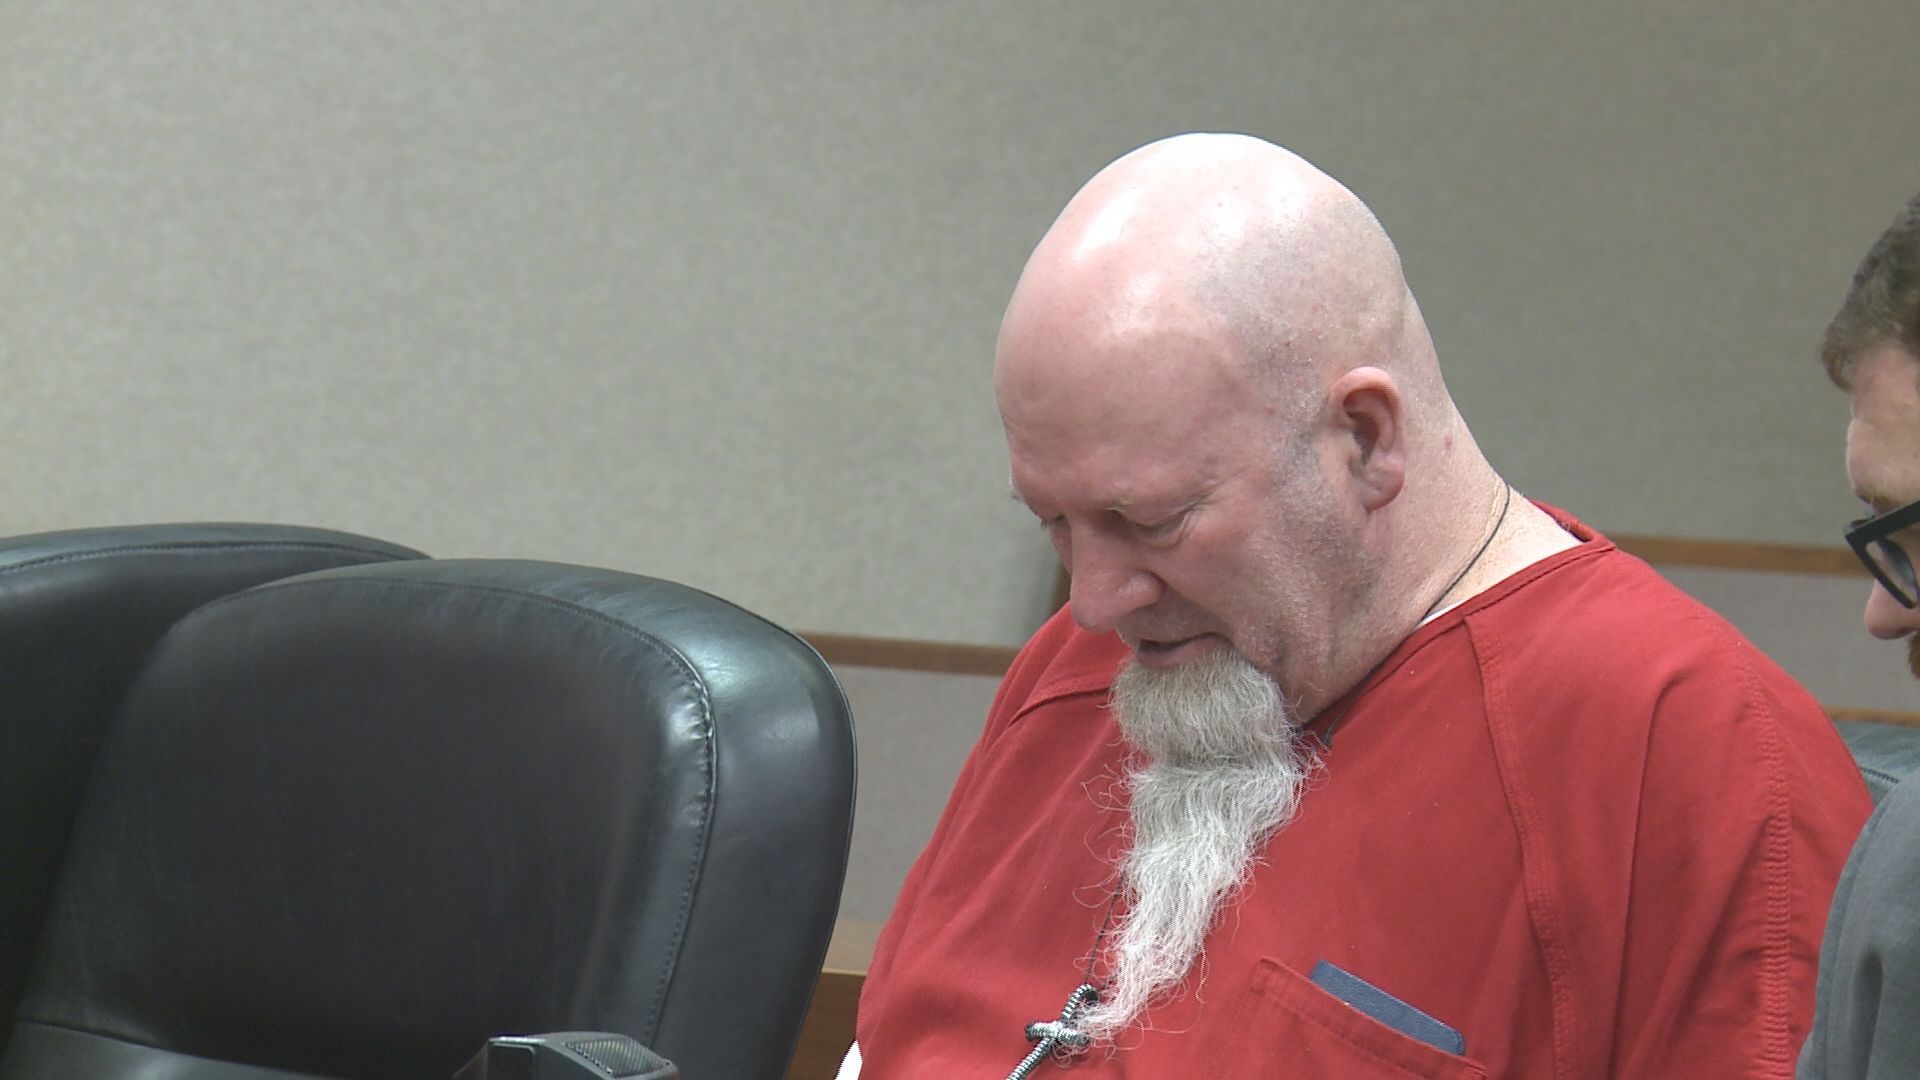 Ronald Burdette will not be eligible for parole until 2042.